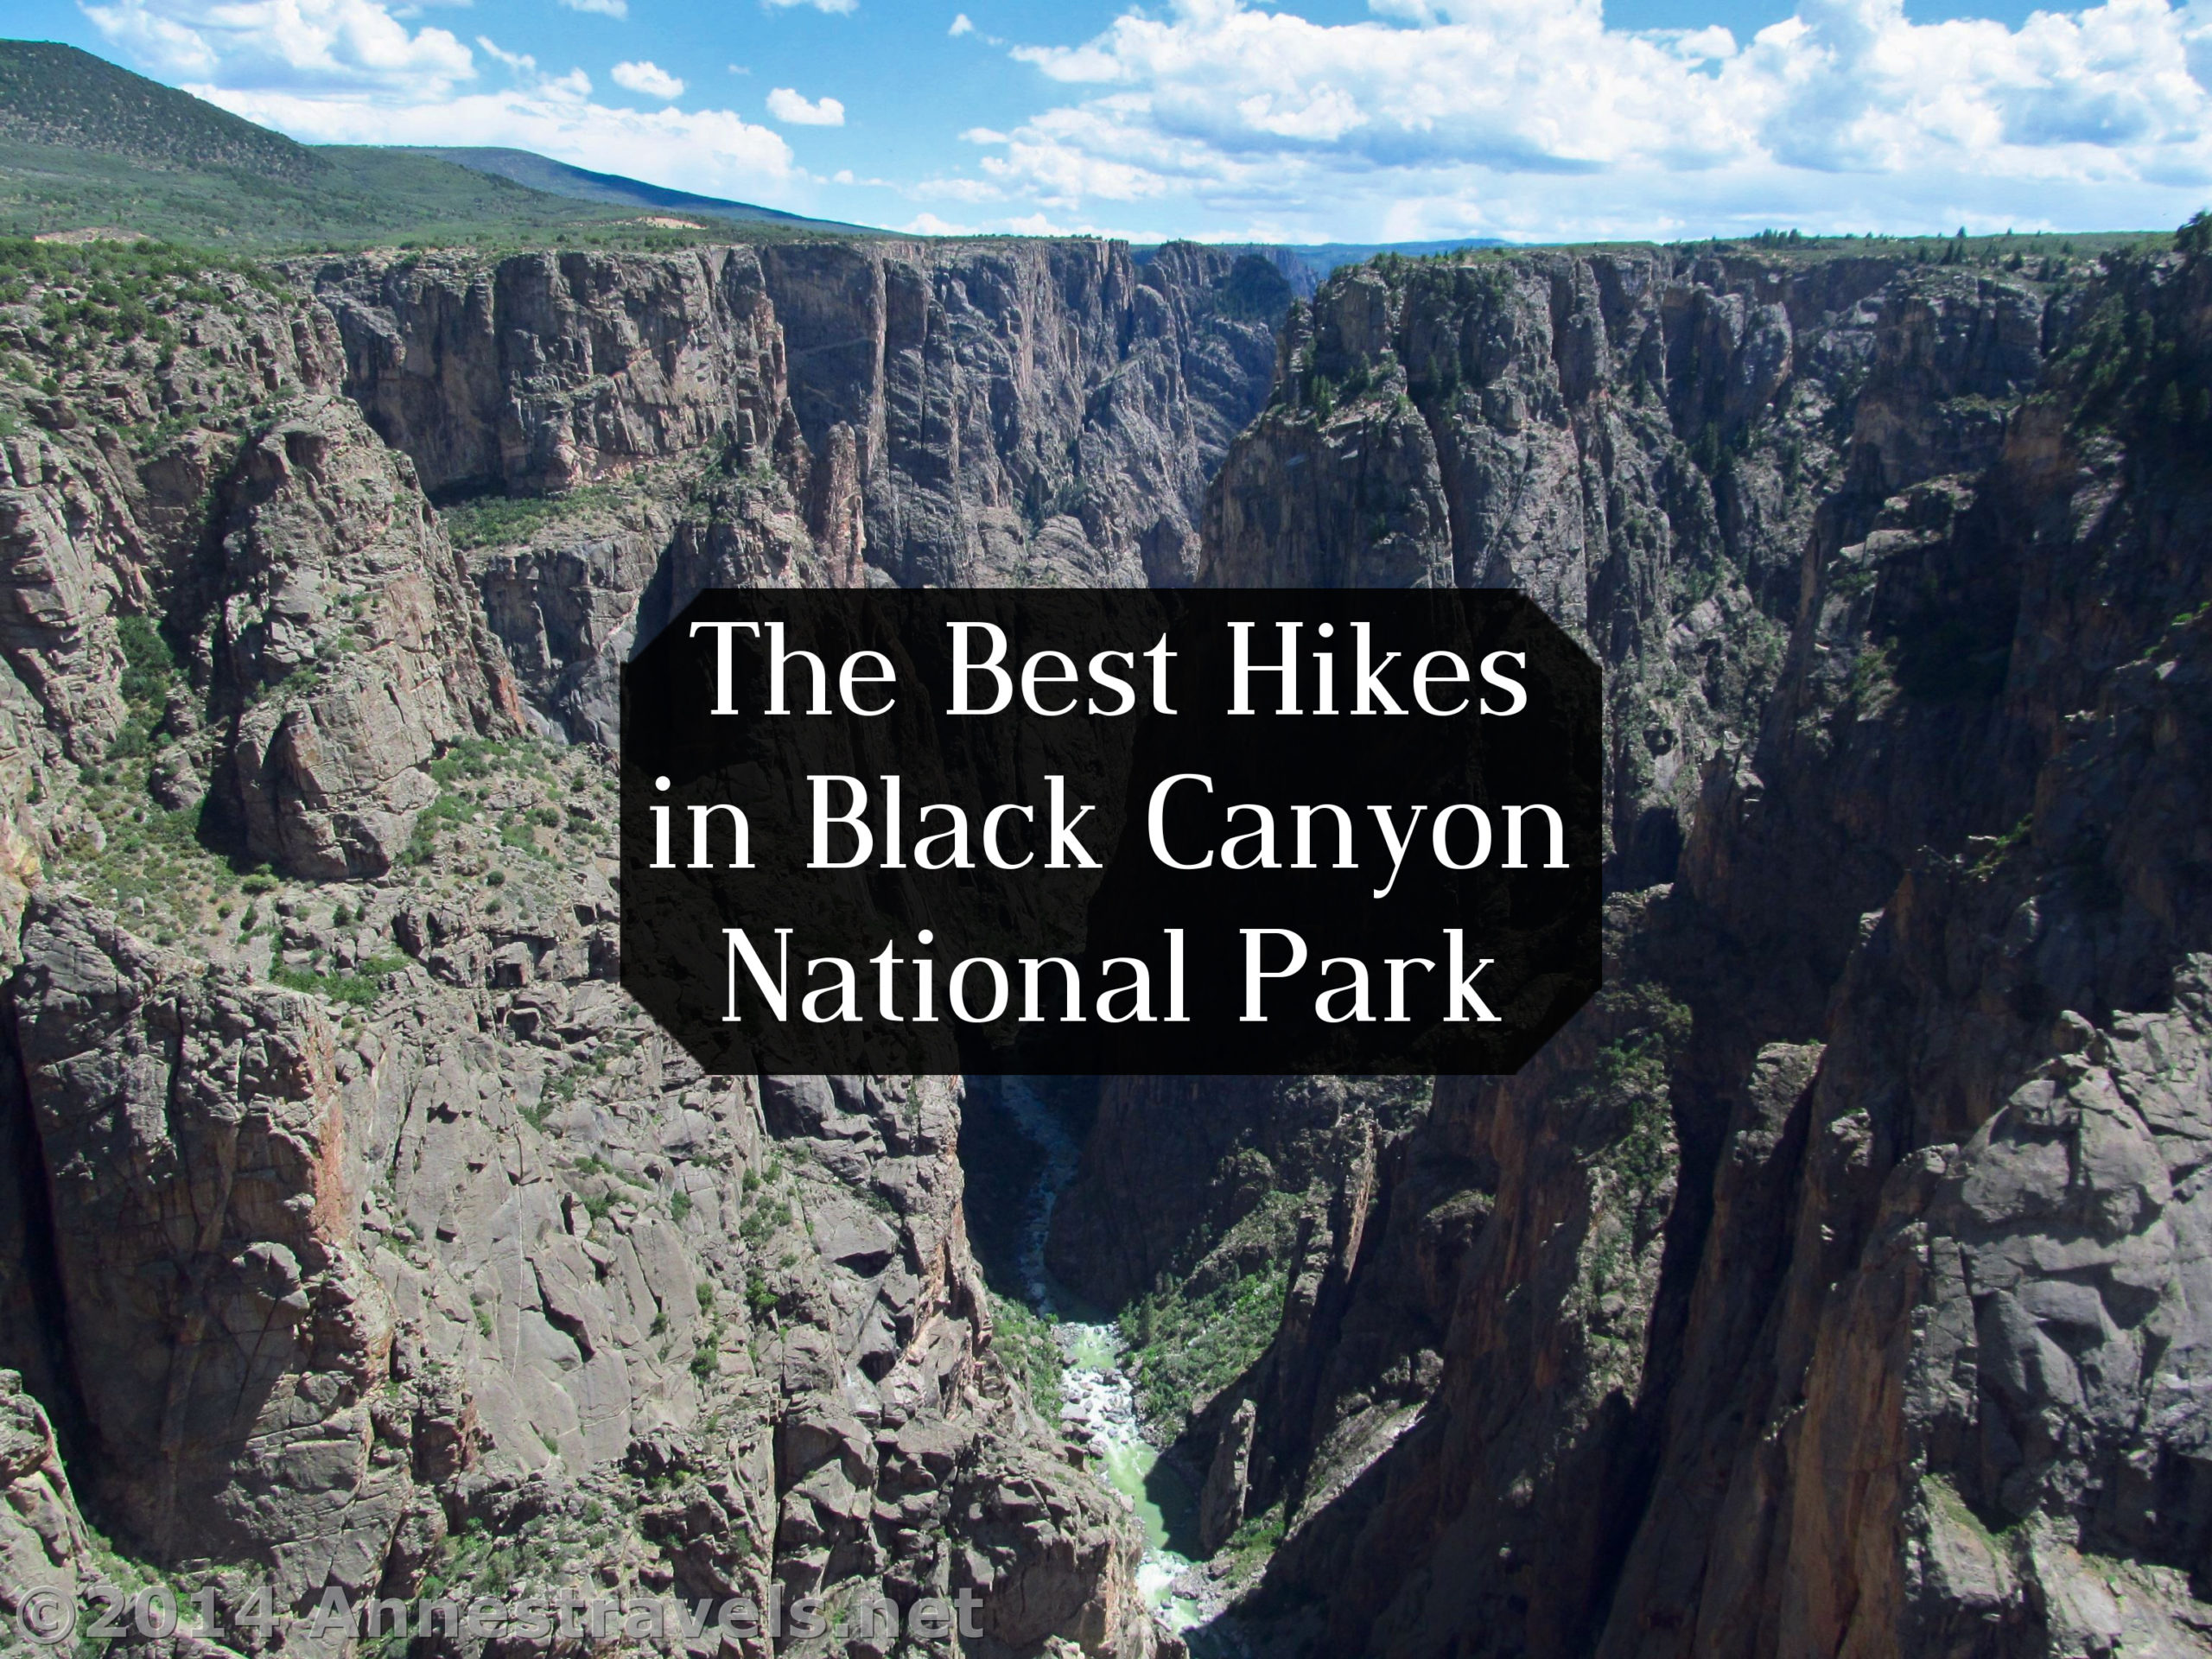 4x4 inch ROUND Black Canyon of the Gunnison National Park Sticker co hike